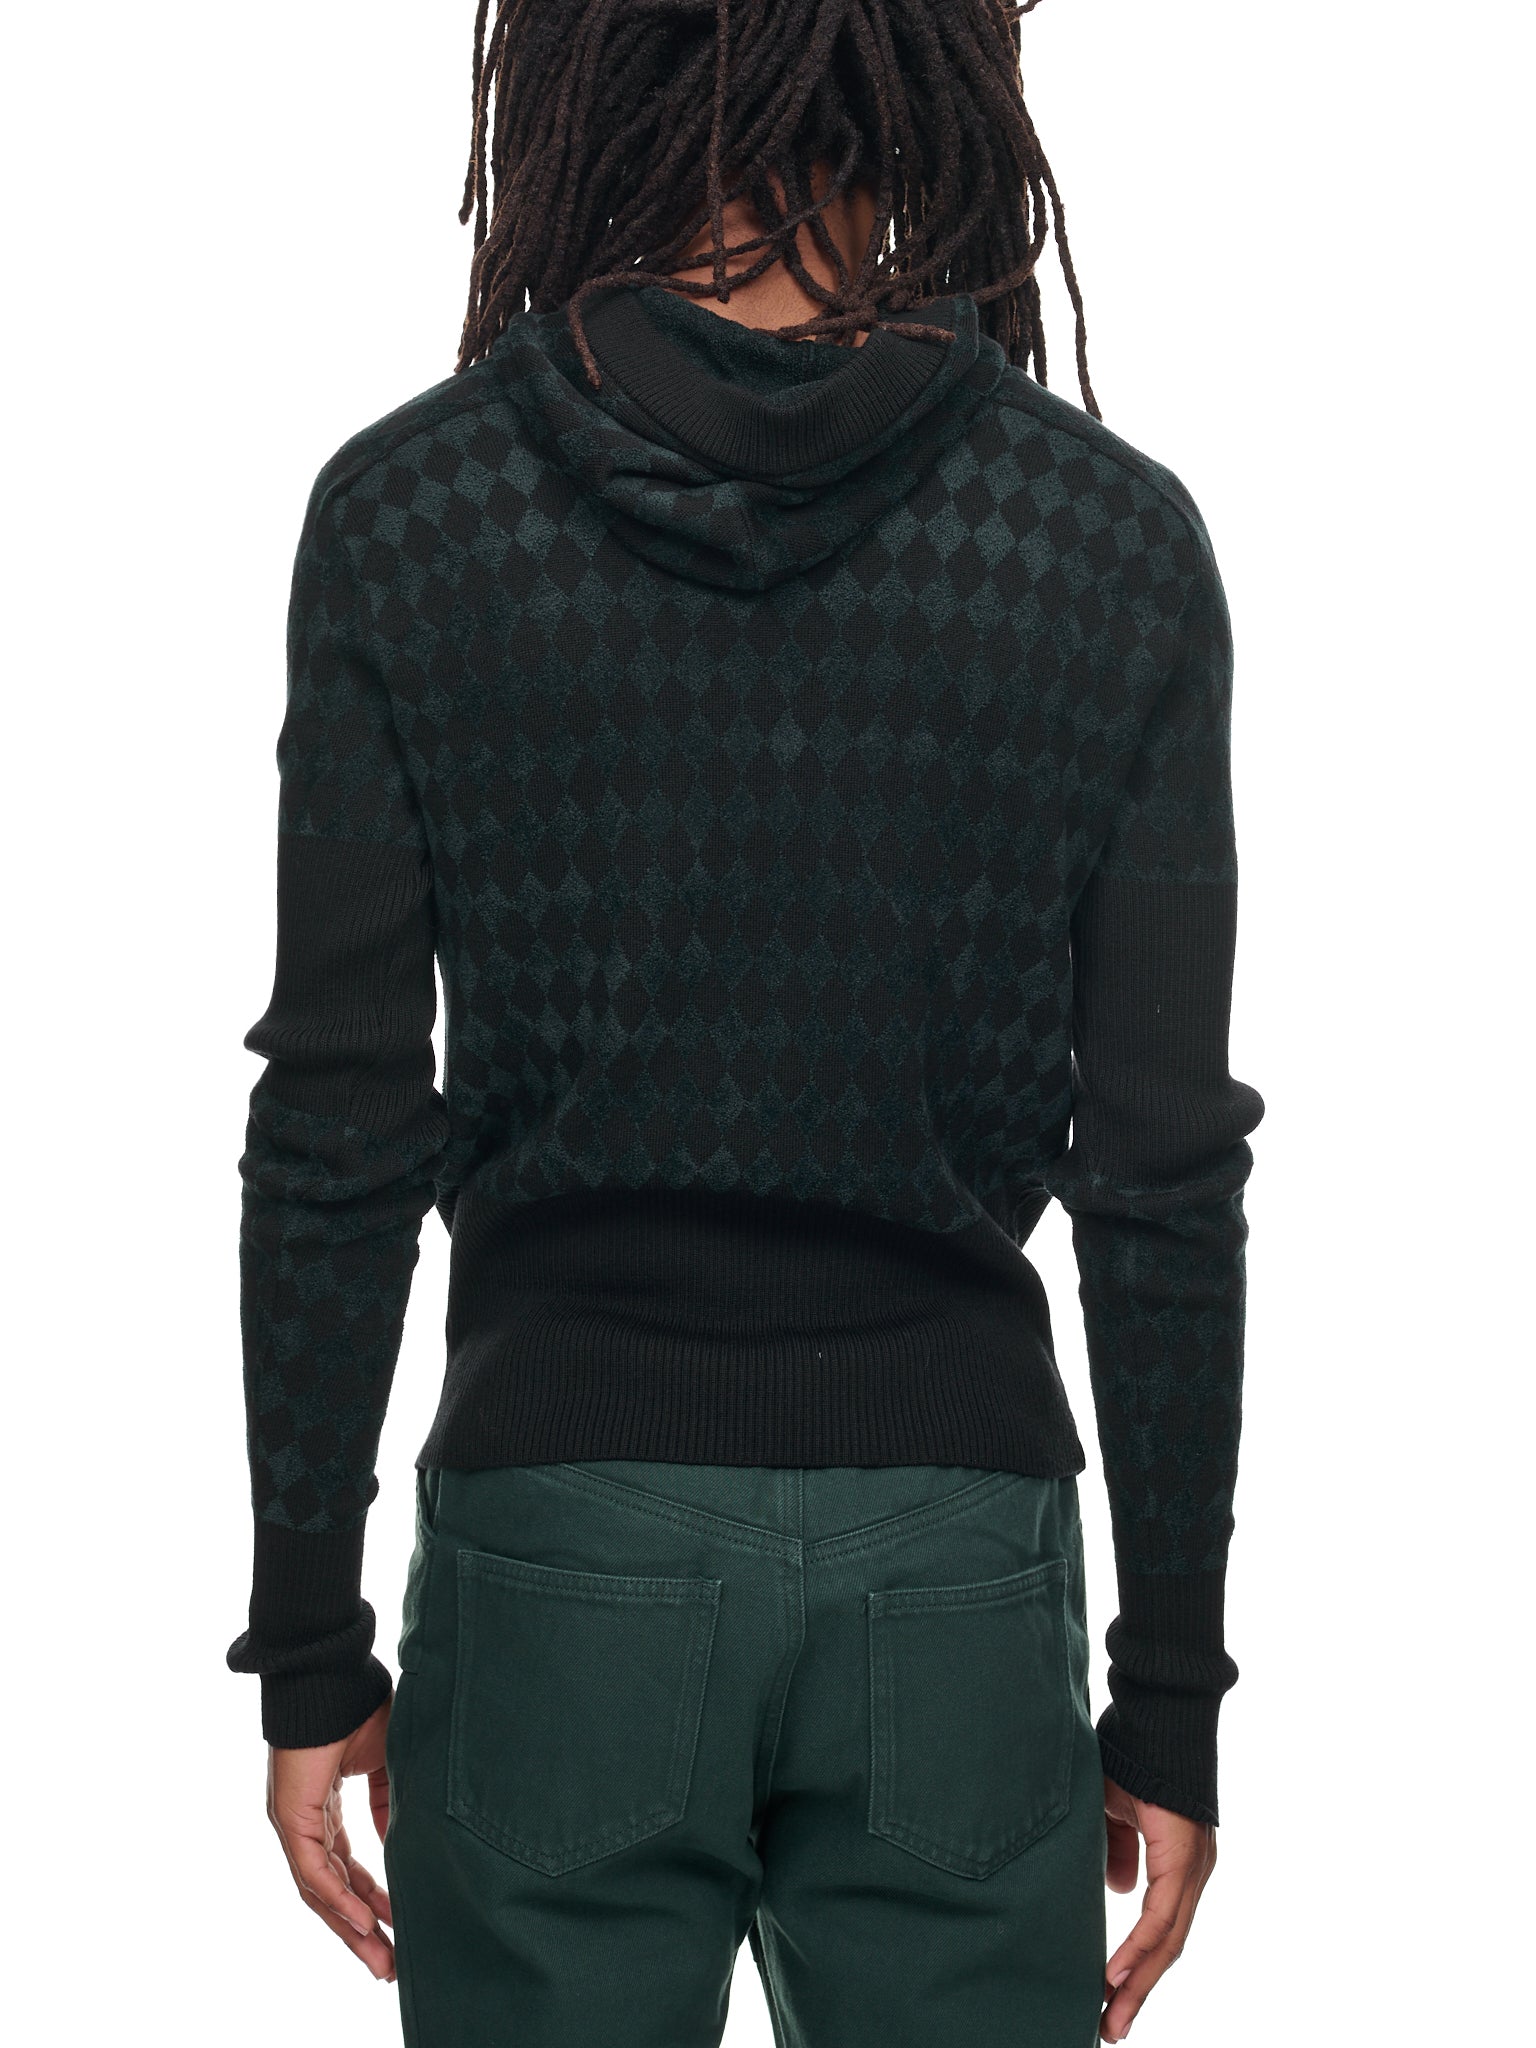 Harlequin Knit Hoodie (UA22KN01-WO06-BLACK-FOREST-GRE)